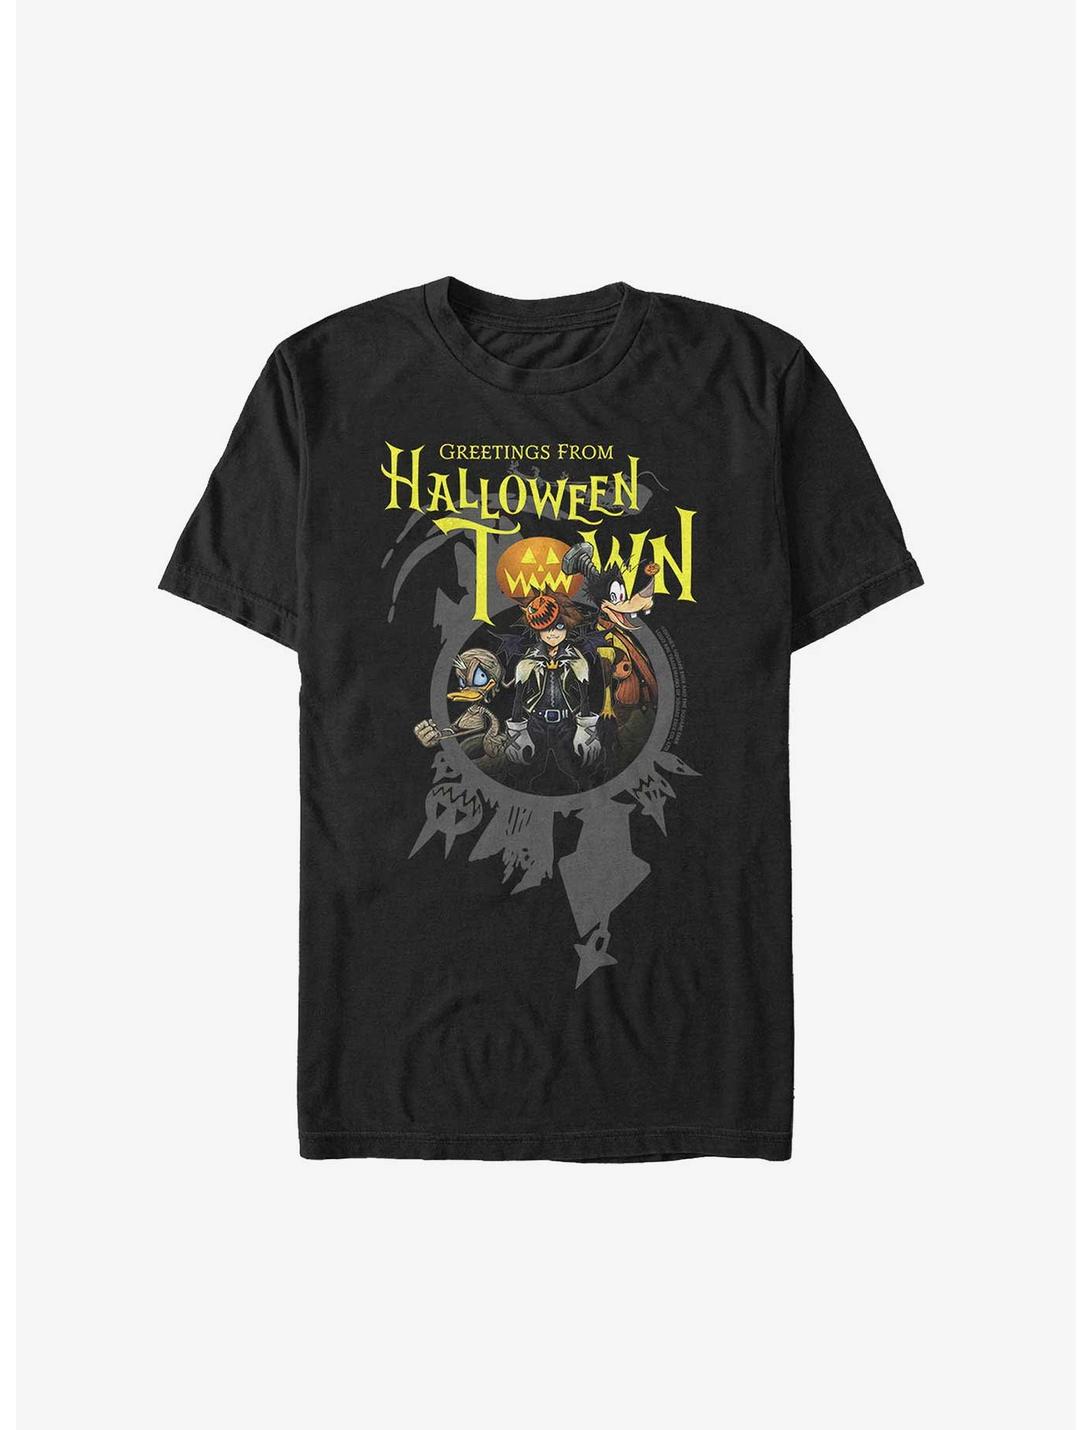 Disney Kingdom Hearts Greetings From Halloween Town Extra Soft T-Shirt, BLACK, hi-res